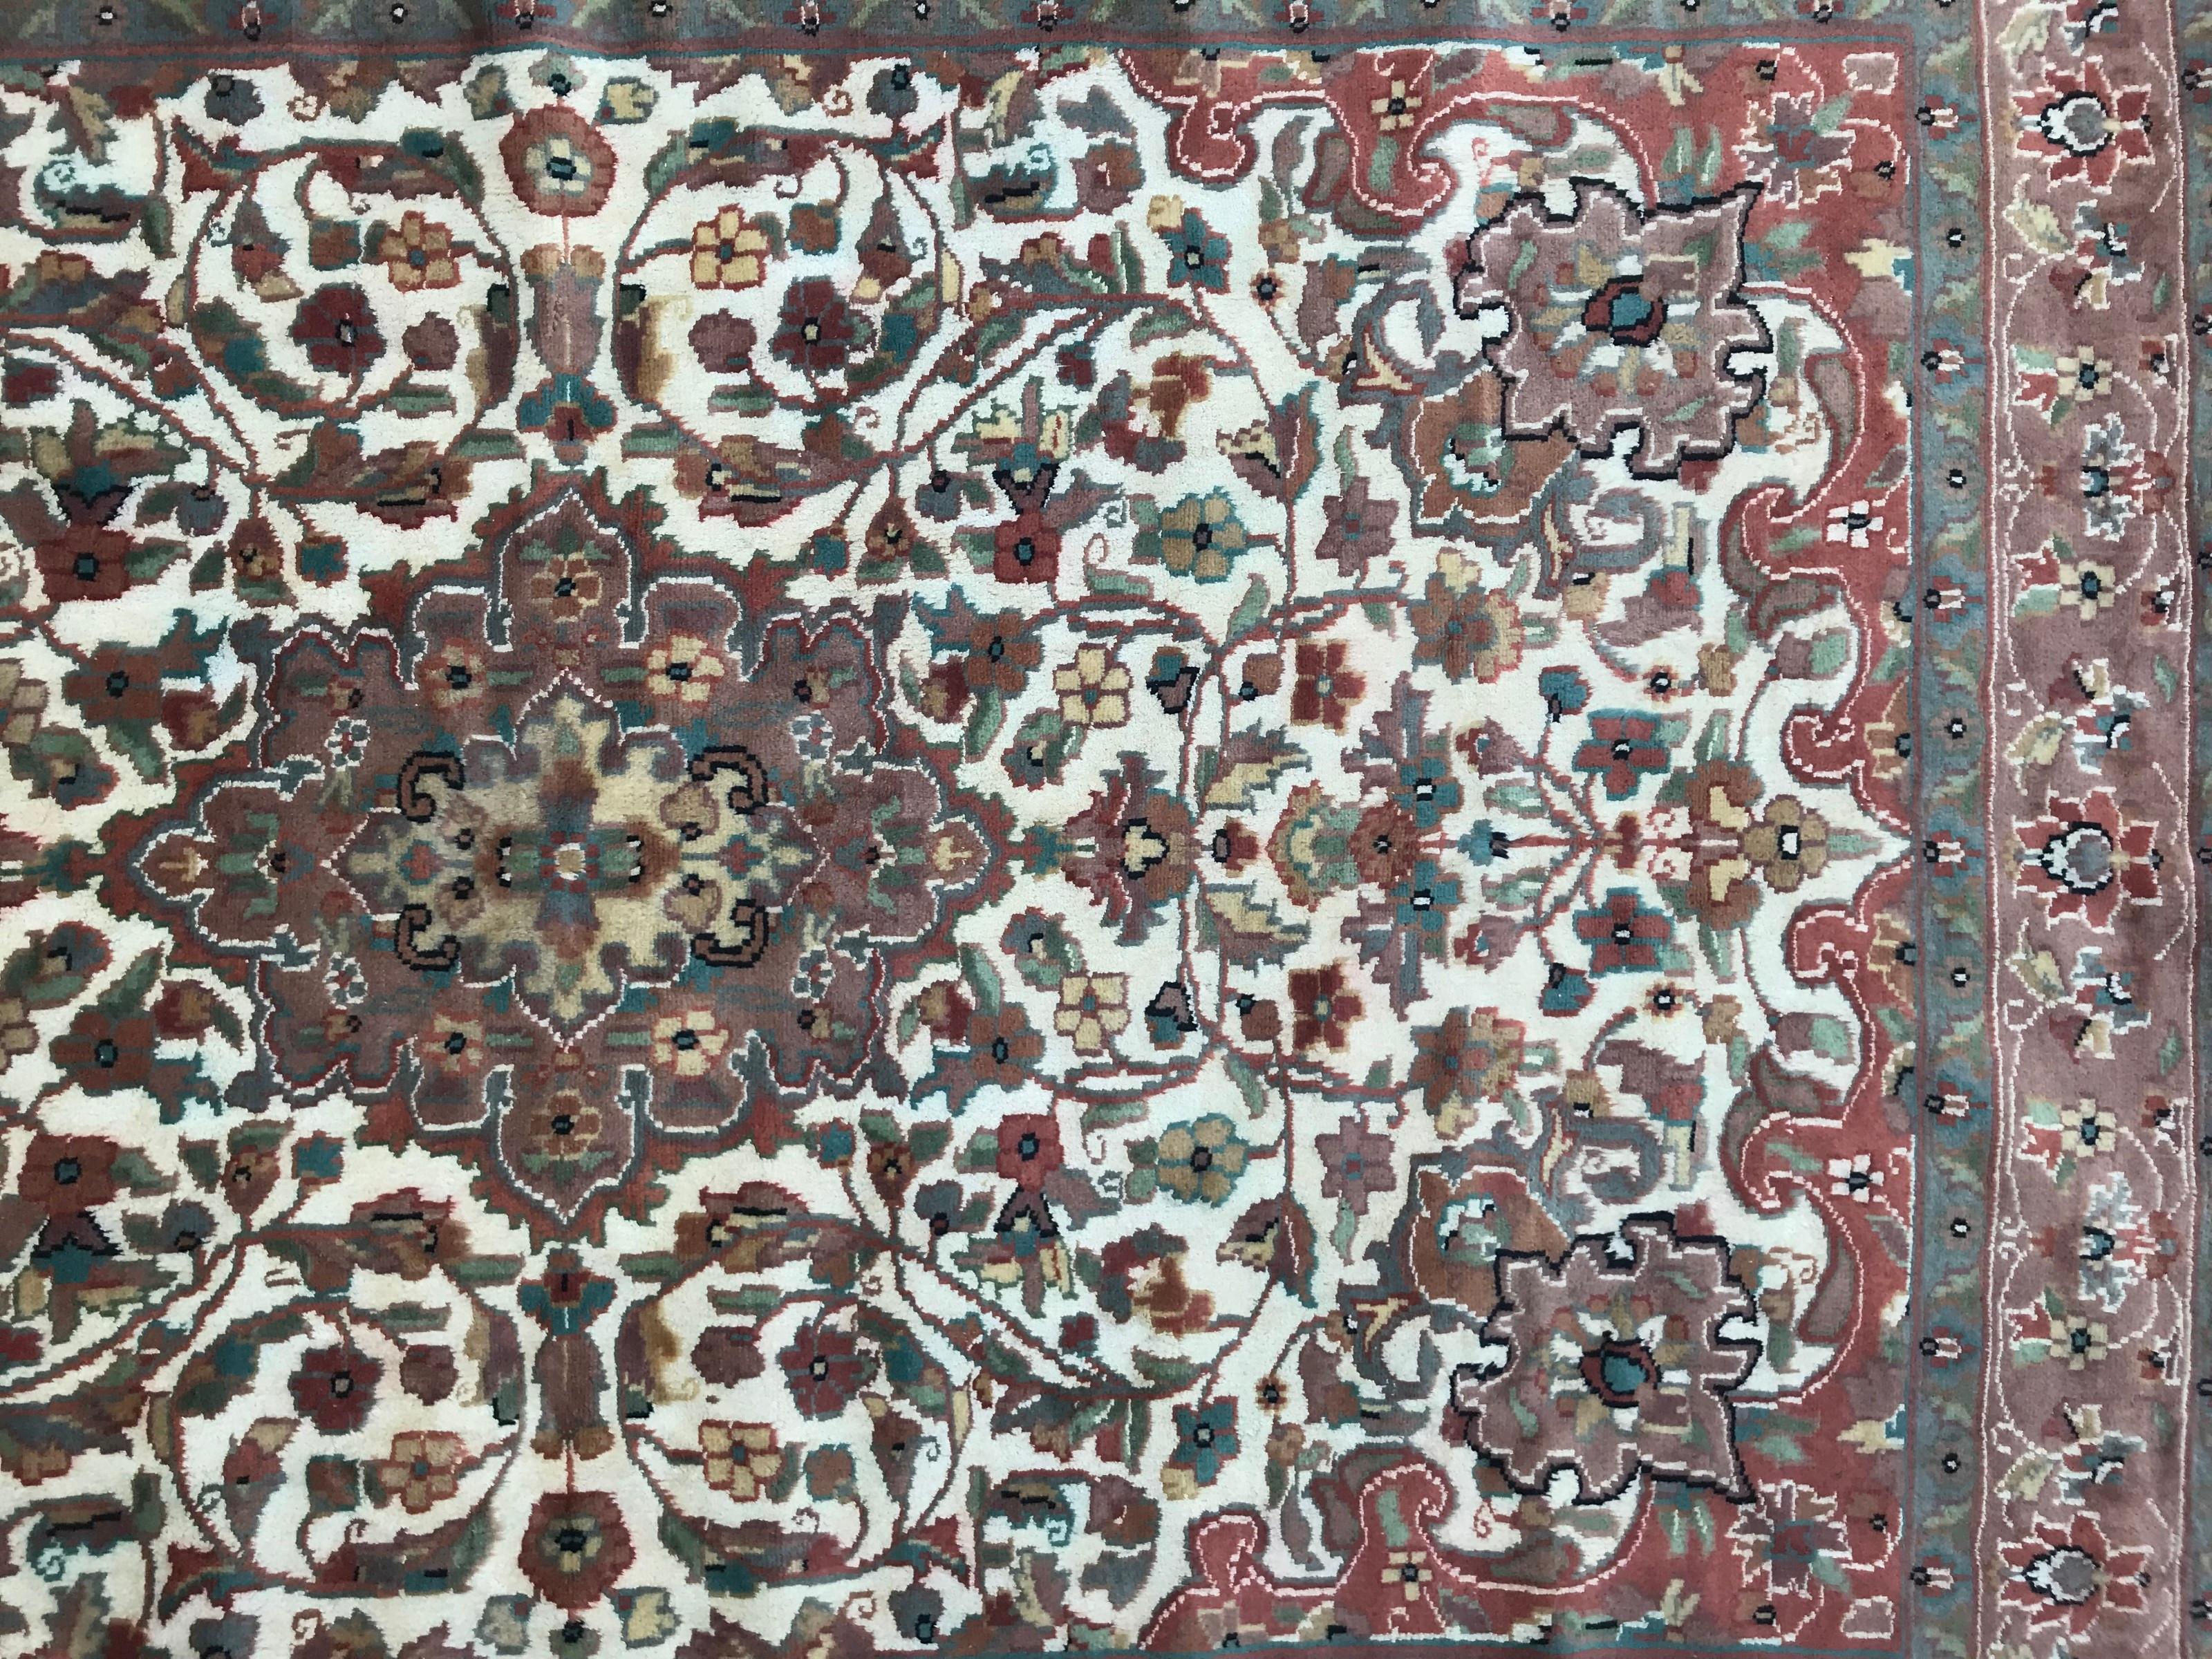 Exquisite late 20th-century Pakistani rug featuring a stunning floral central medallion design. Hand-knotted with precision using silk and wool velvet on a cotton foundation. The light colors, including pink, yellow, green, and purple, adorn a white